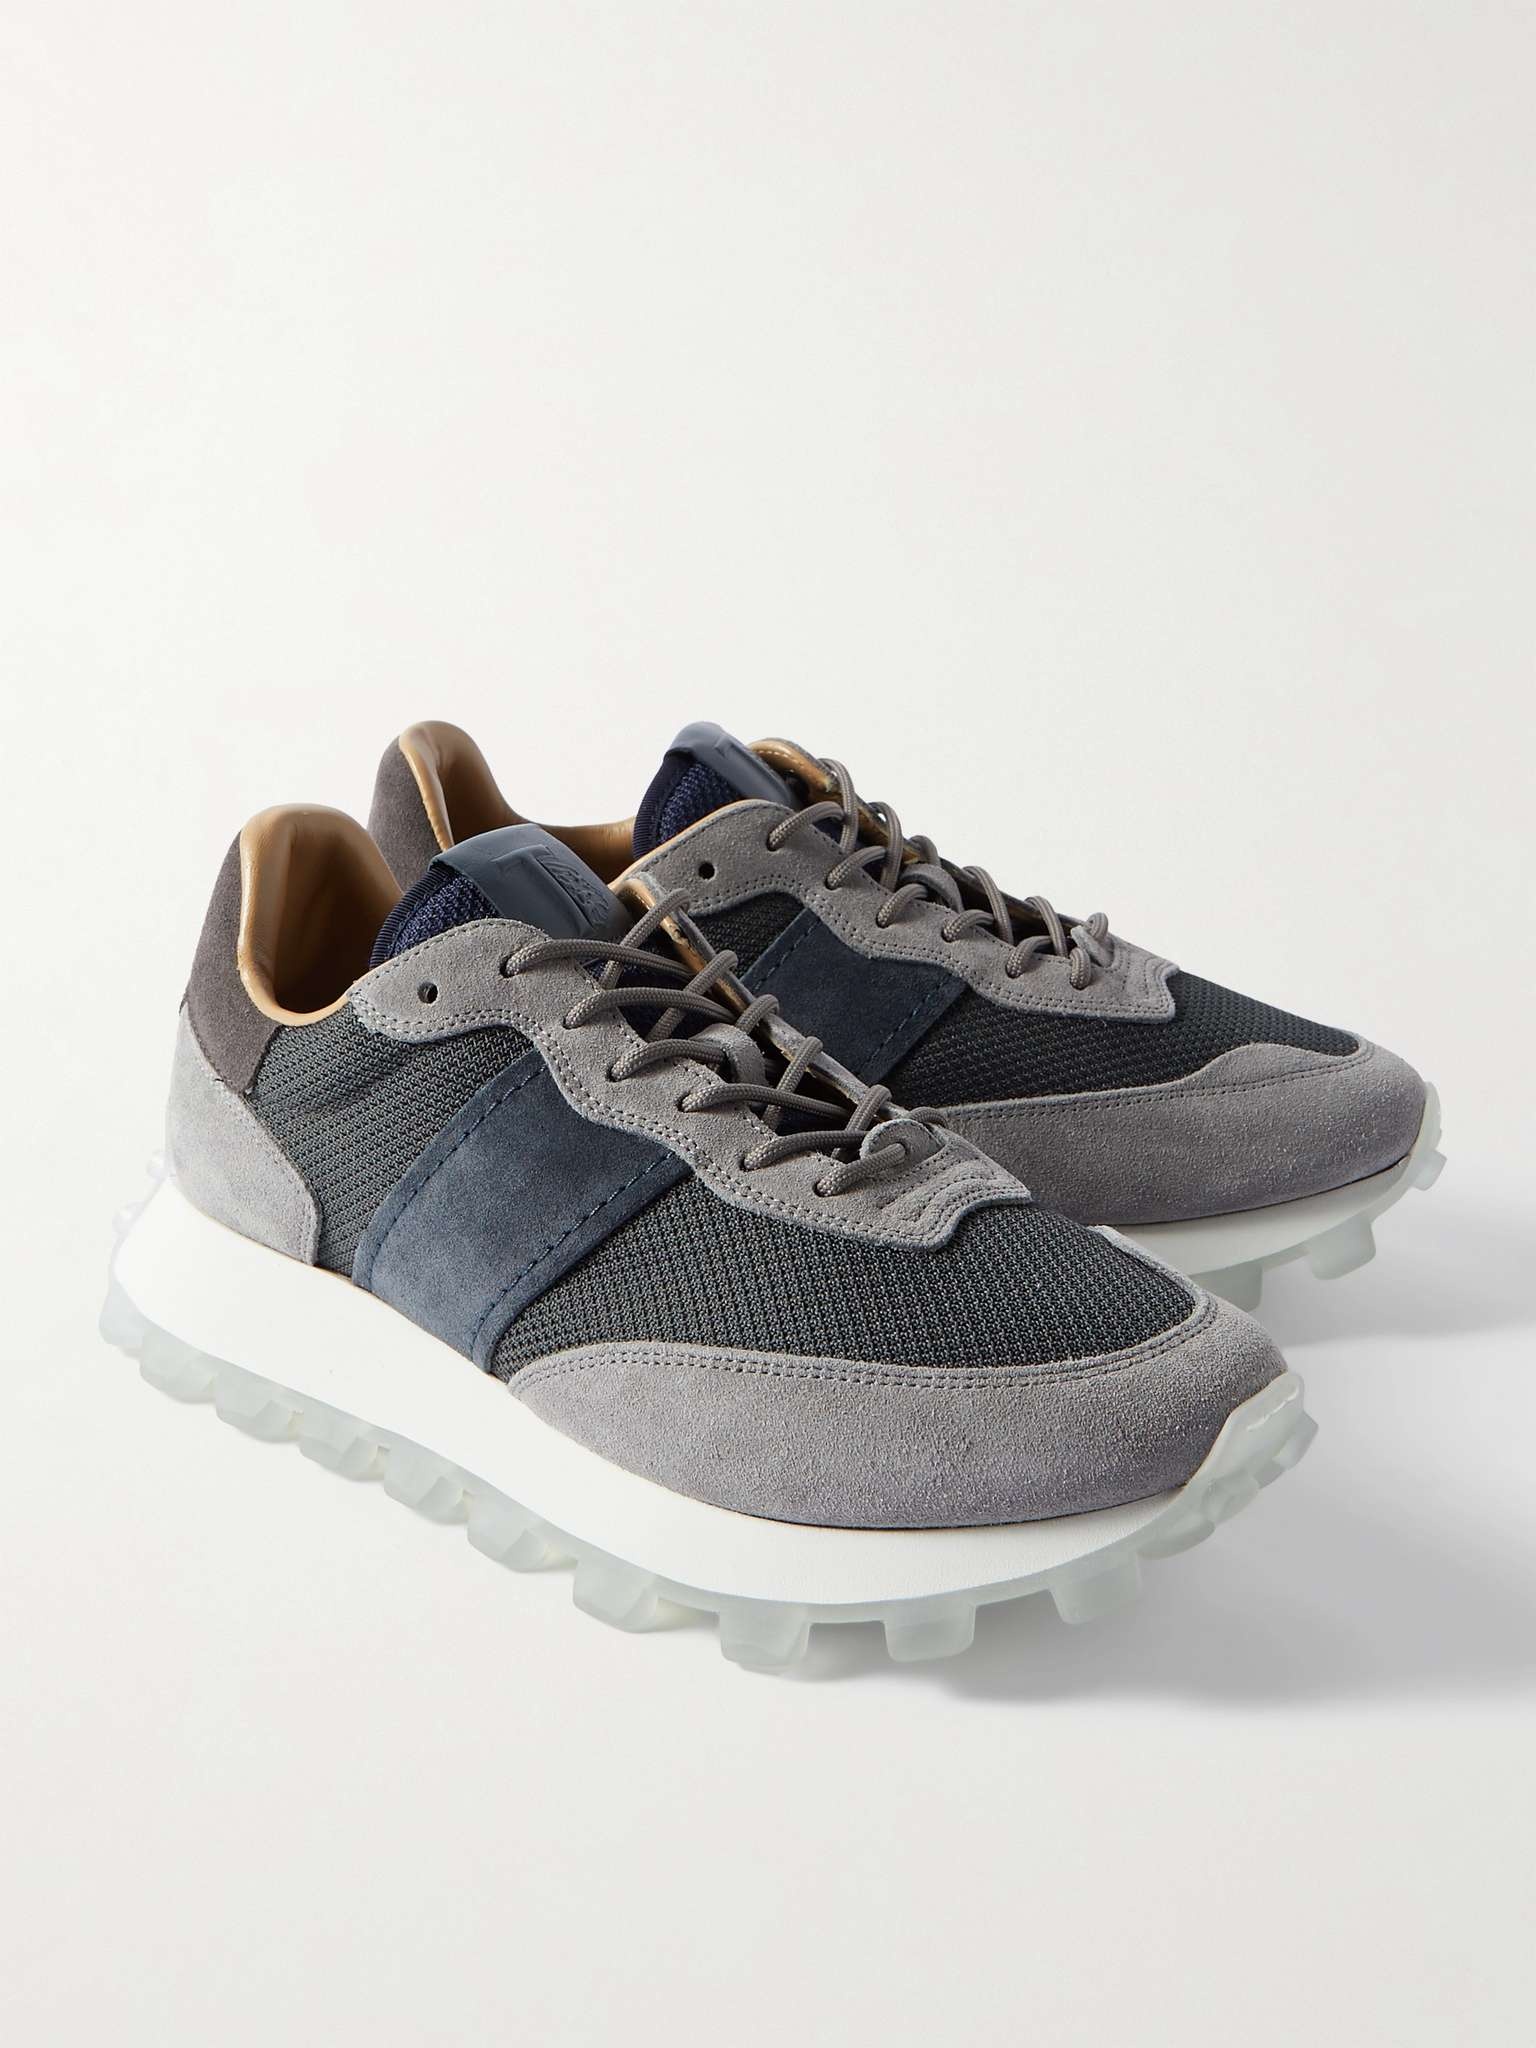 Allacciata Mesh and Suede Sneakers - 4